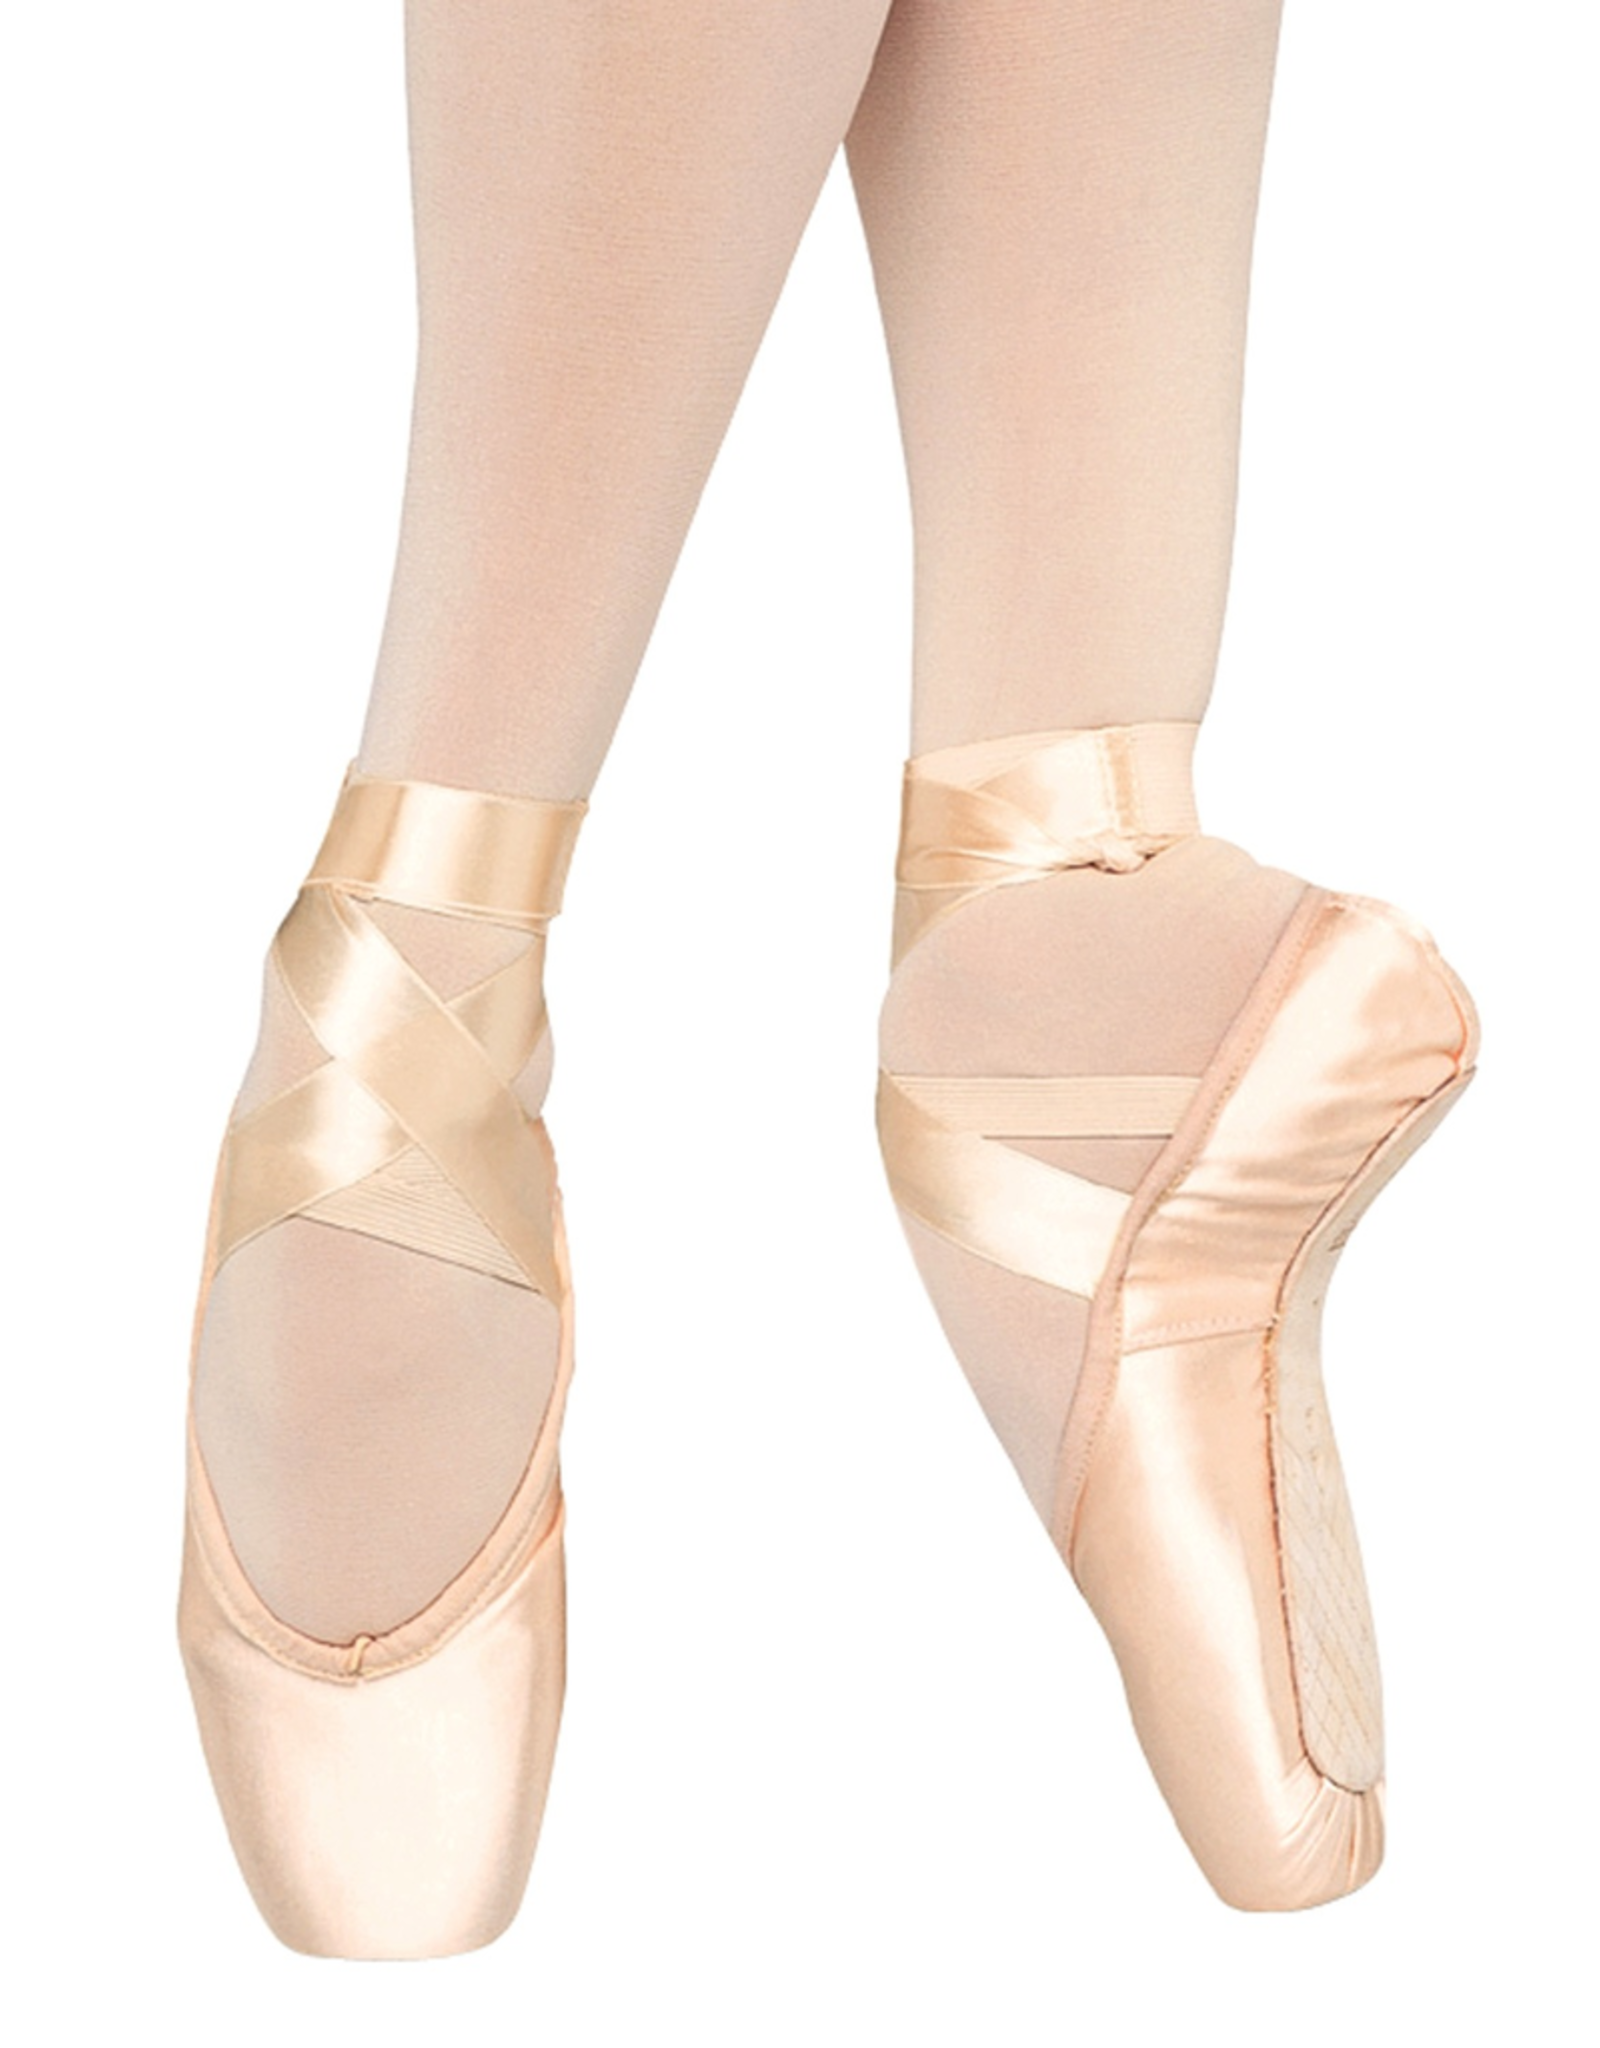 Only $37.50! Bloch Aspiration Pointe Shoes 